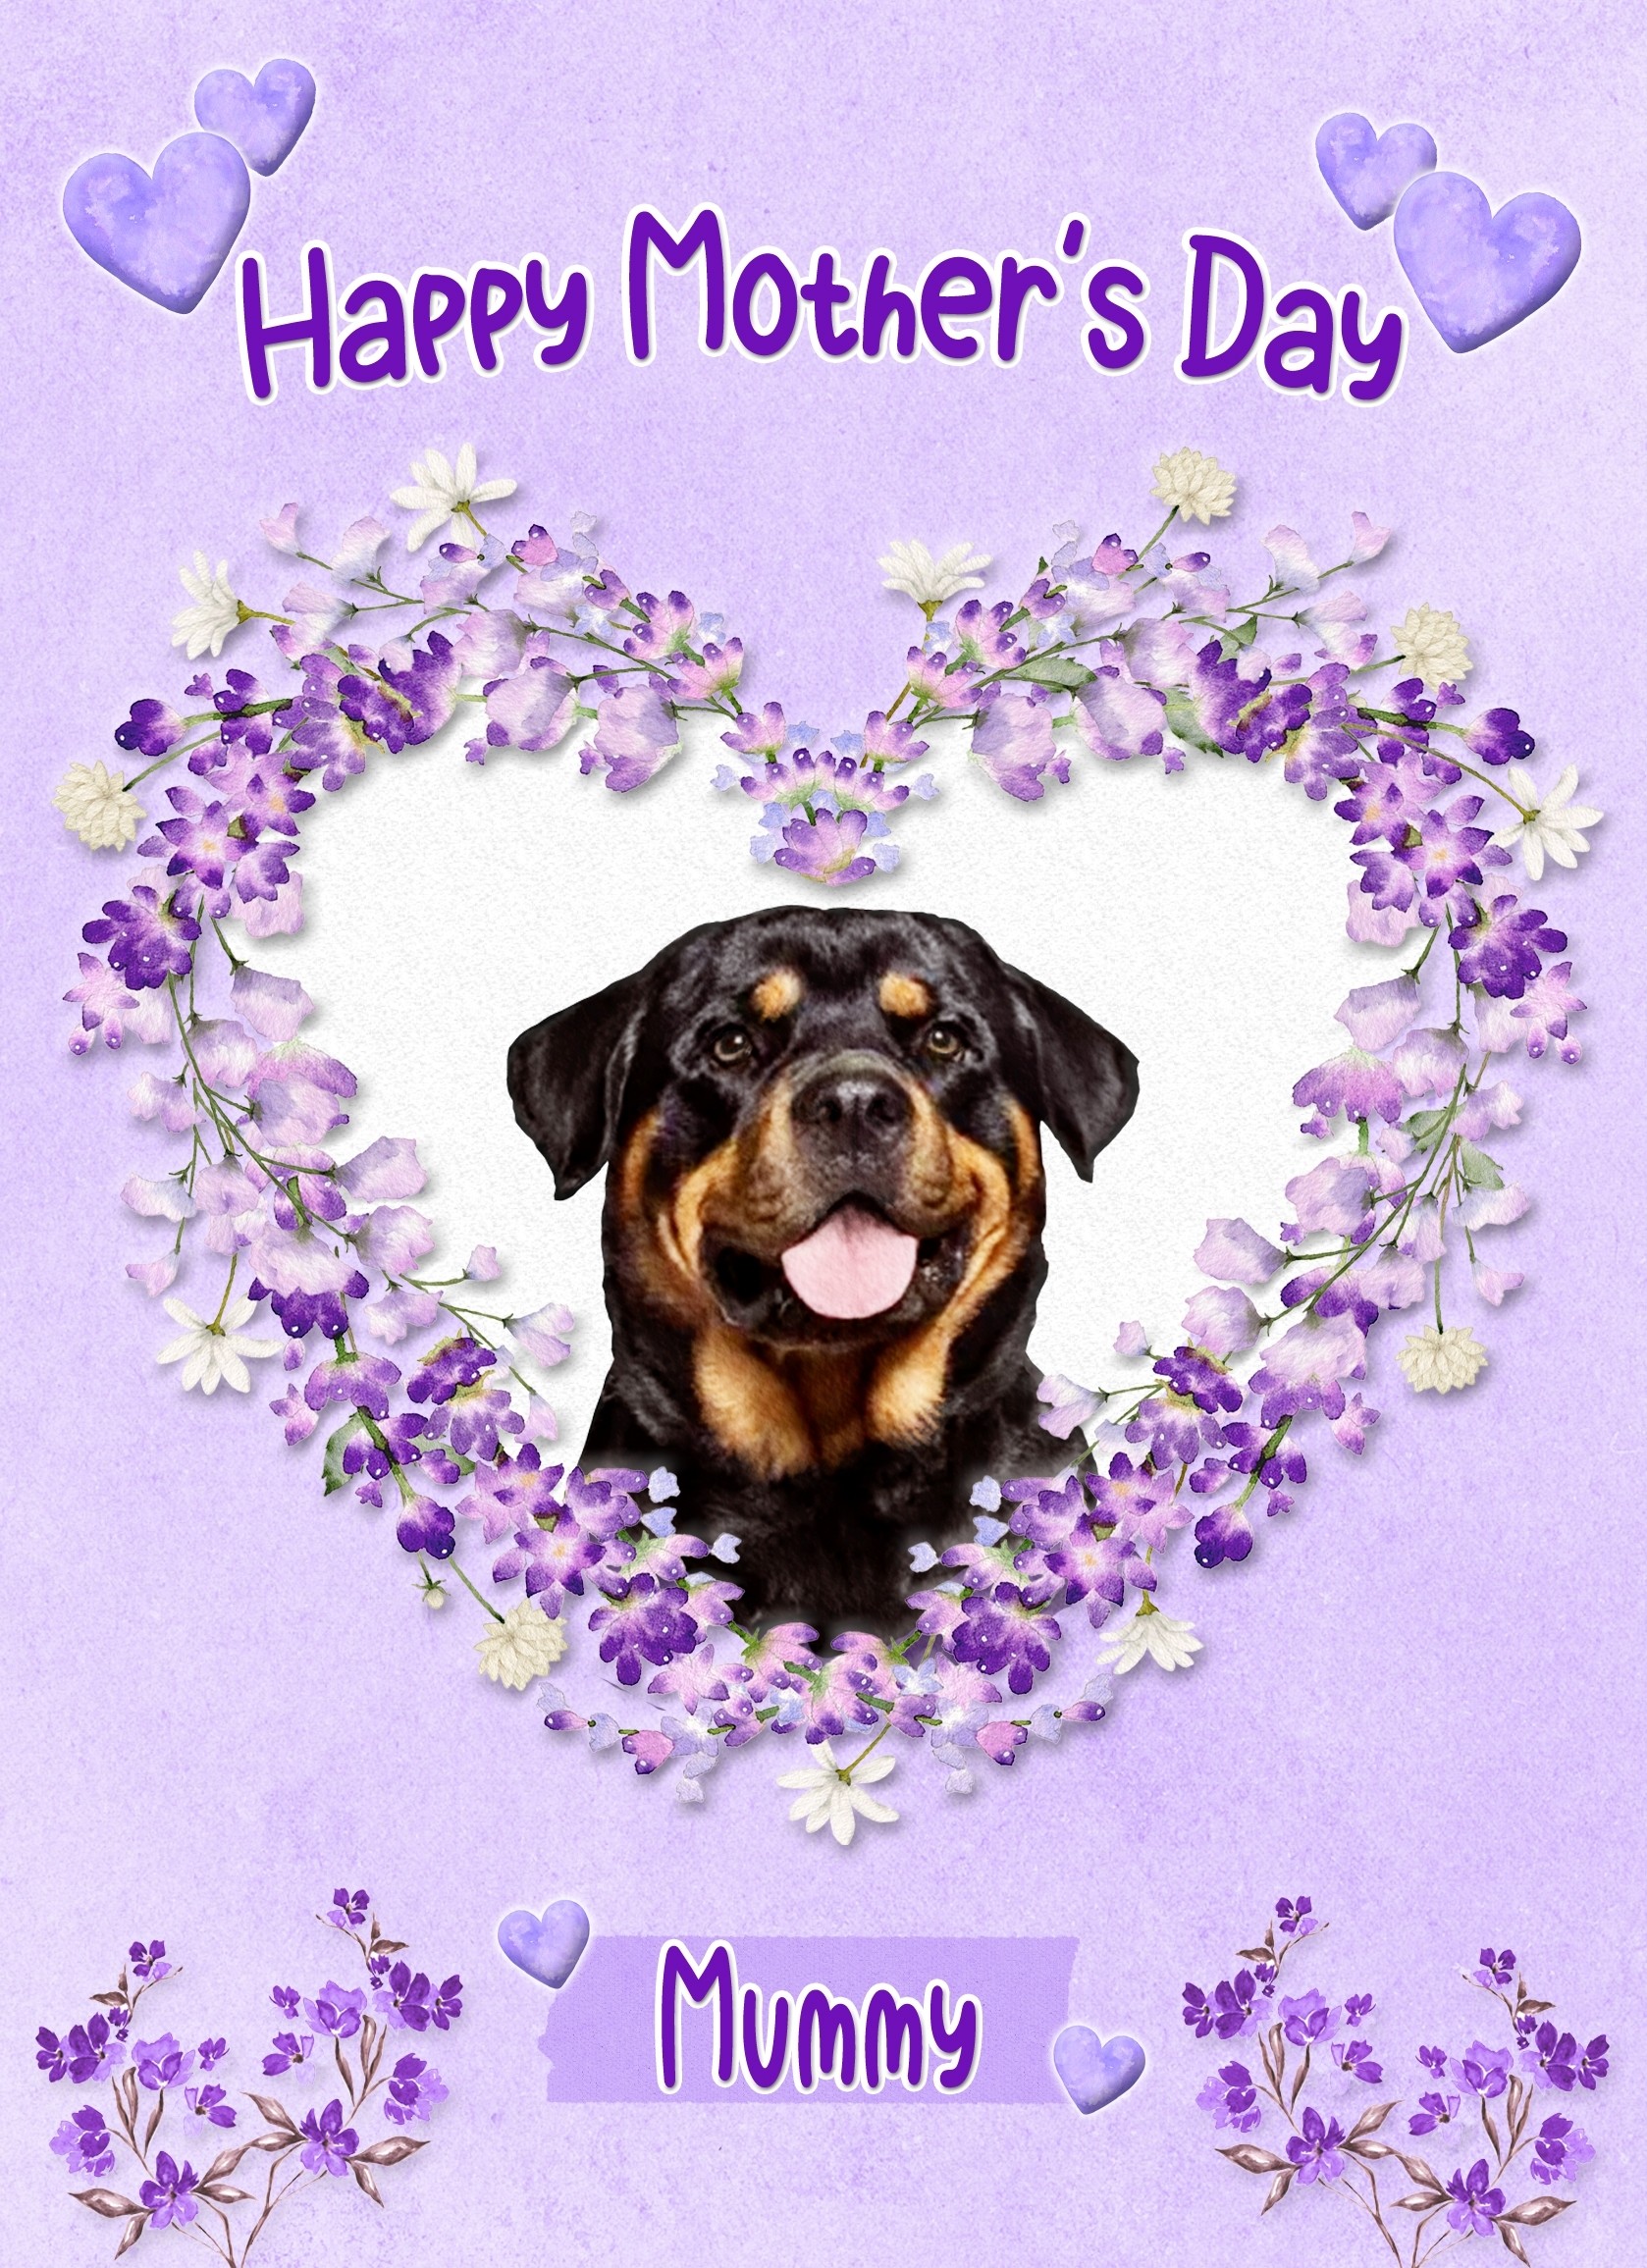 Rottweiler Dog Mothers Day Card (Happy Mothers, Mummy)